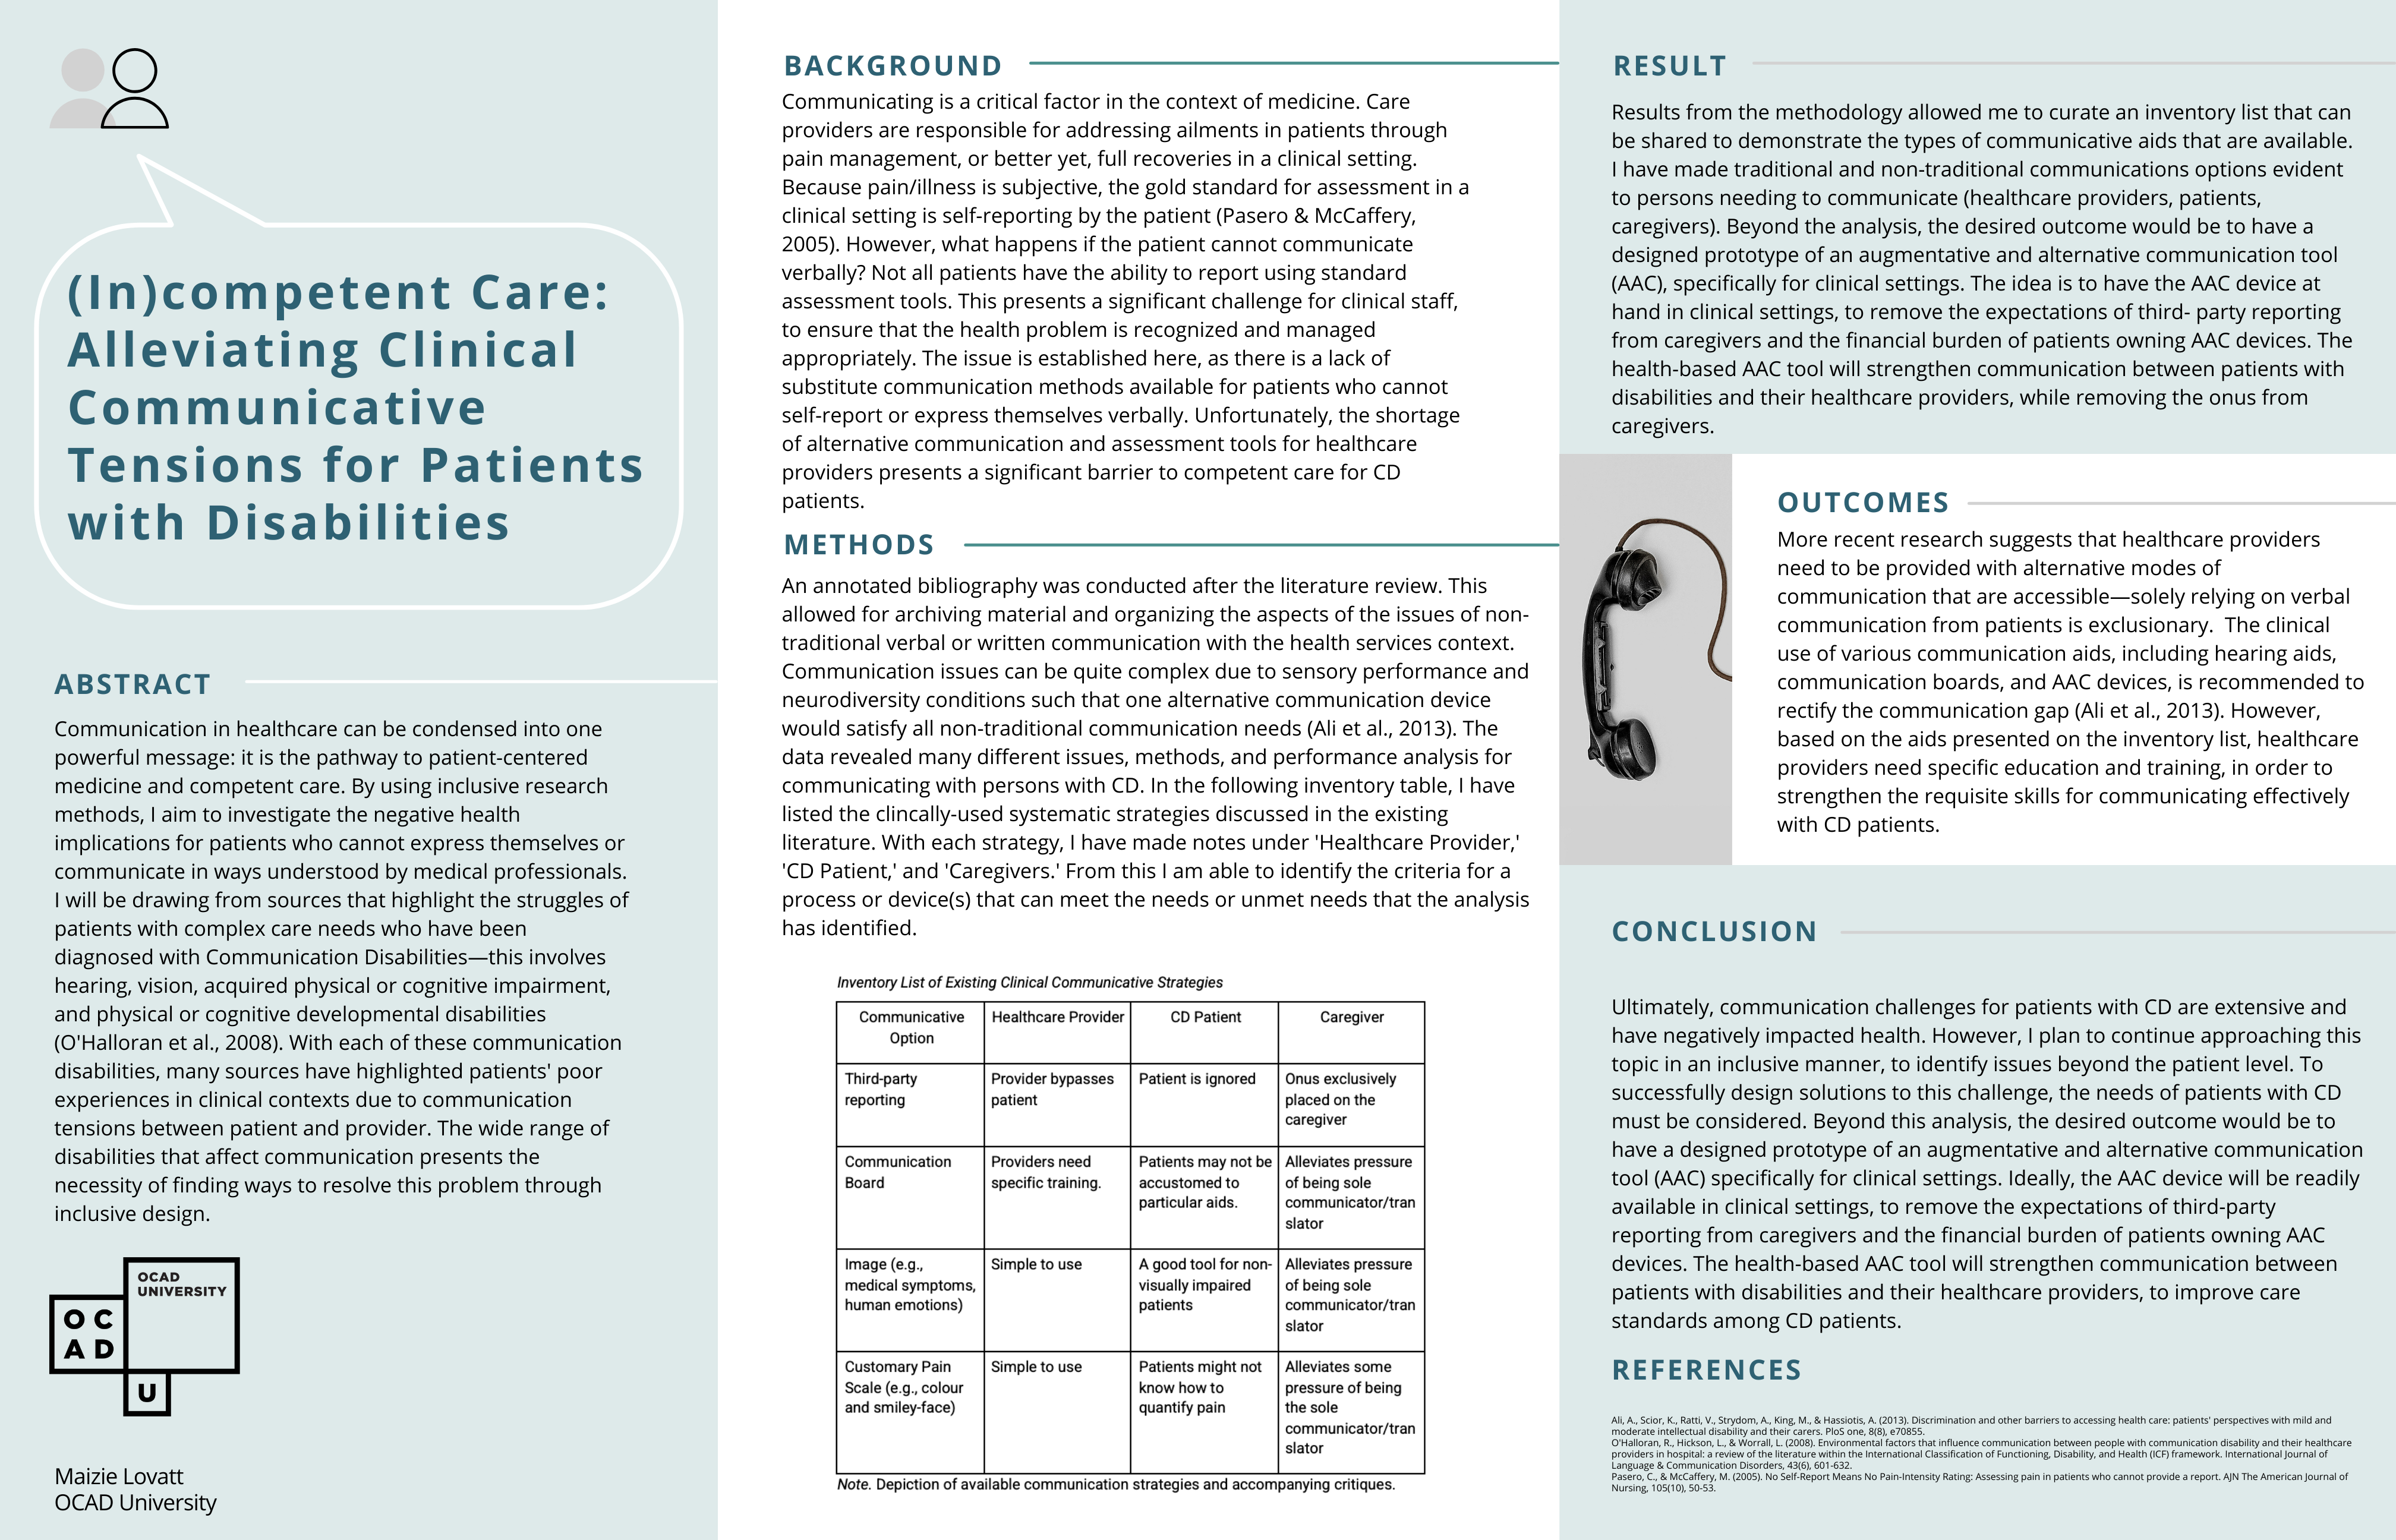 (In)competent Care: Alleviating Clinical Communicative Tensions for Patients with Disabilities